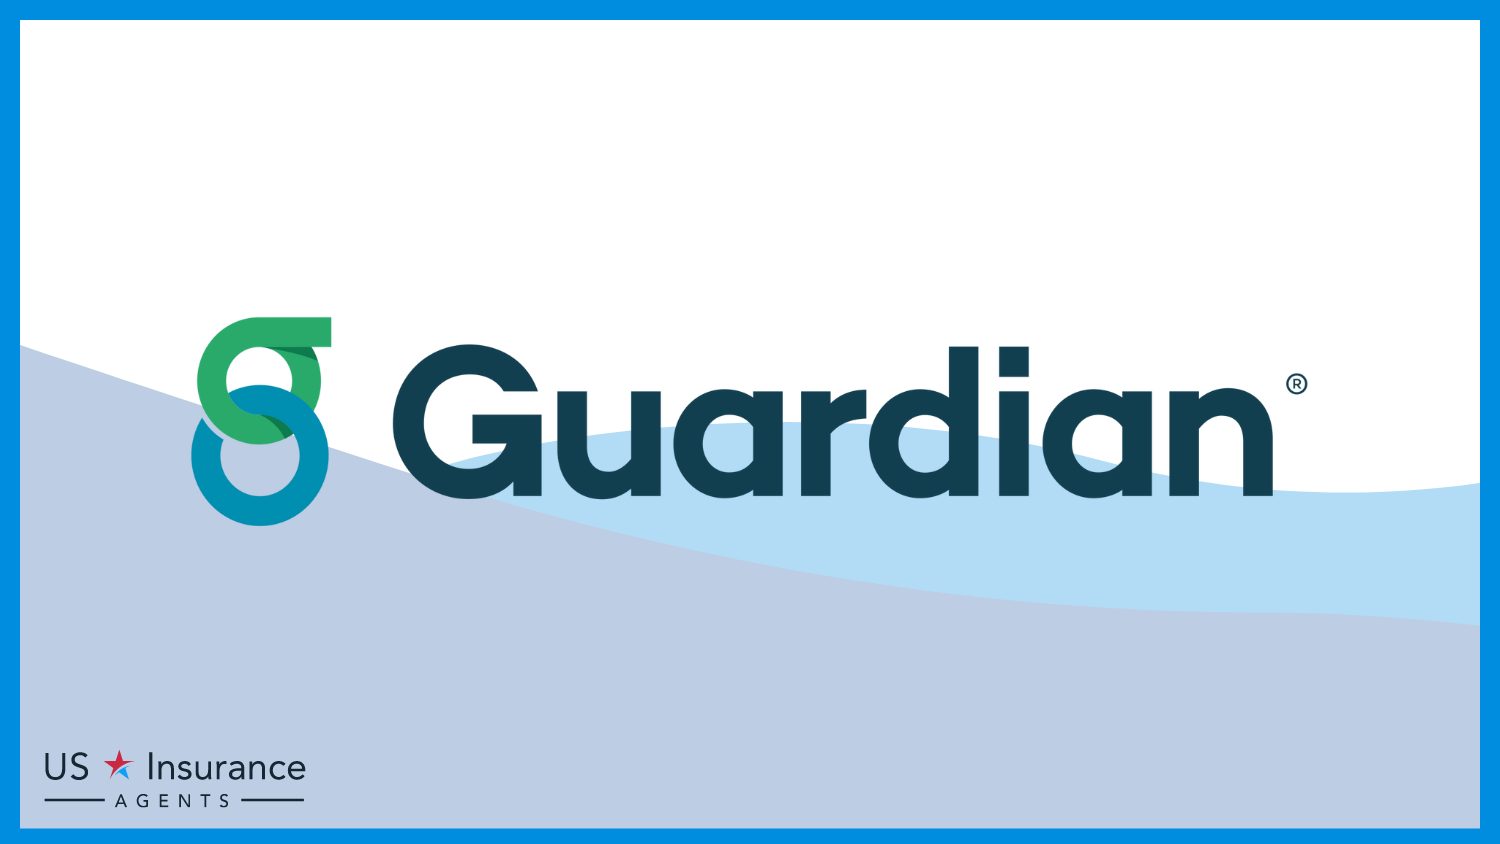 Guardian Life: Best Life Insurance for People With Cystic Fibrosis